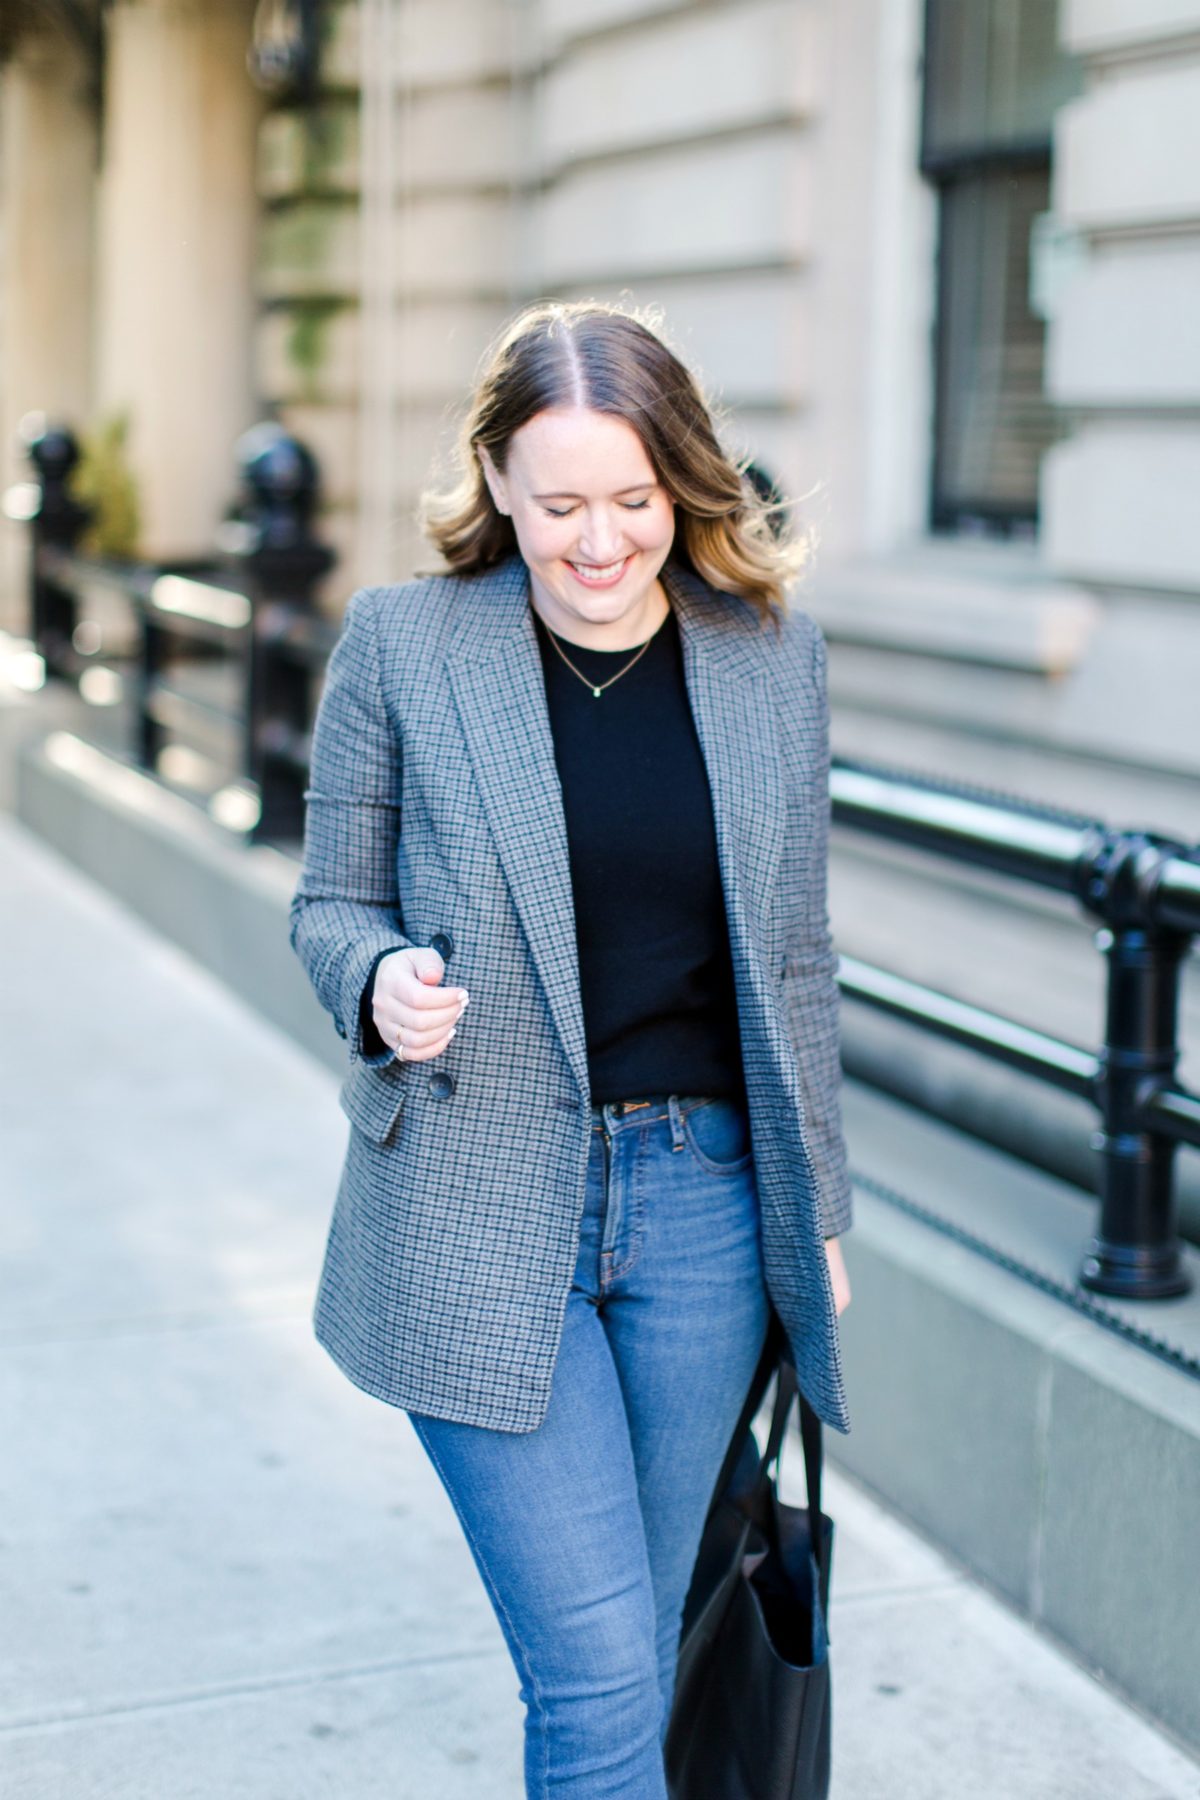 Fall/Winter Wardrobe Staples to Wear - wit & whimsy